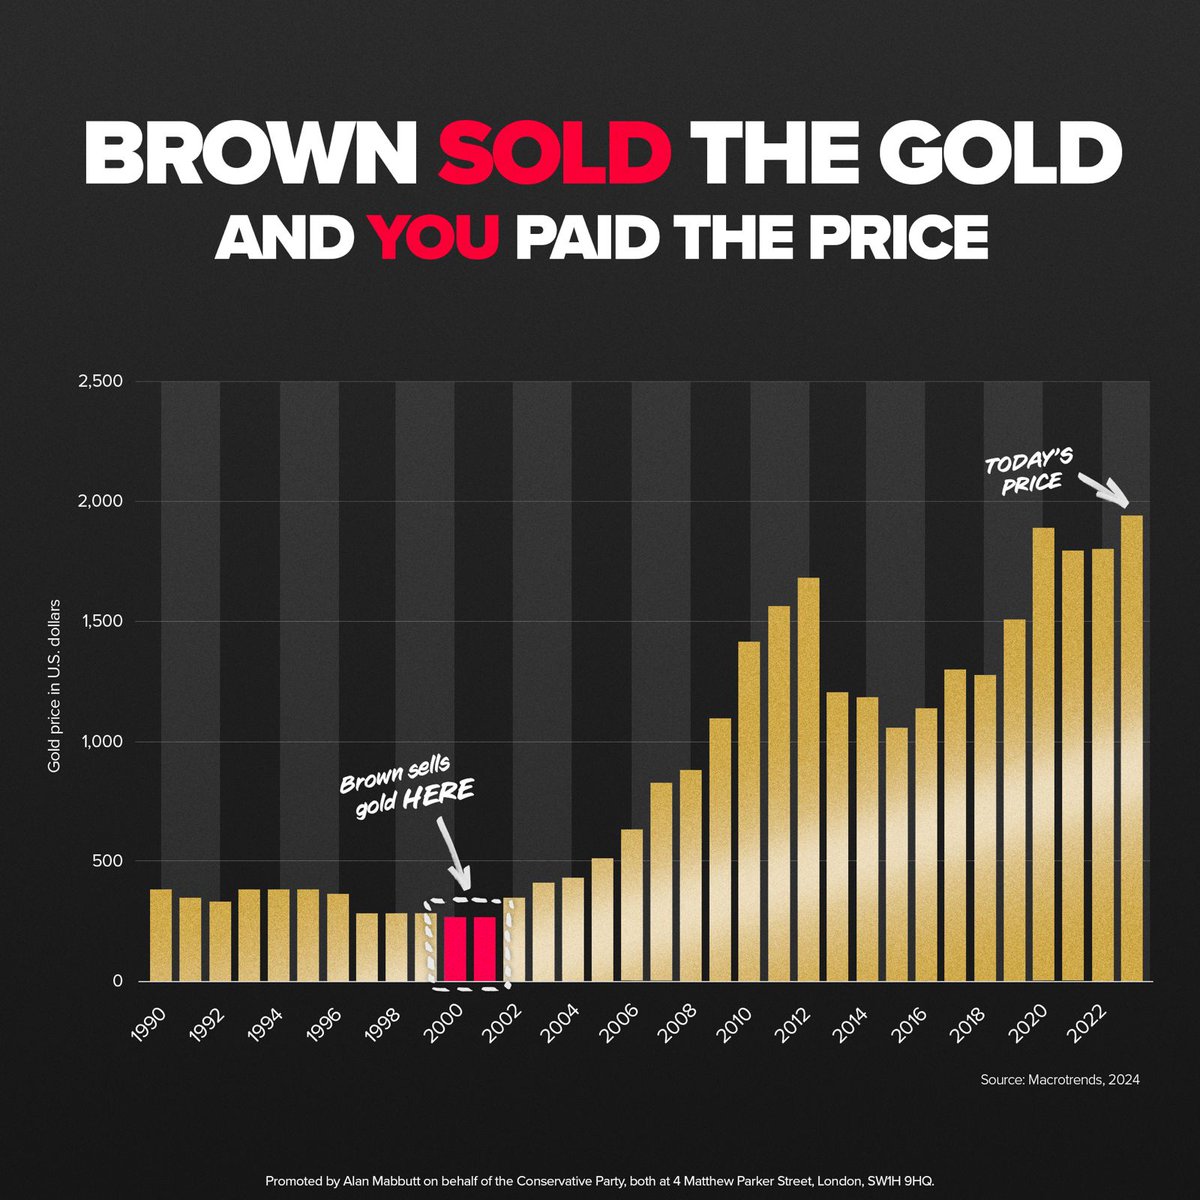 Brown sold the gold. He raided pensions. Then left a note confirming ‘there is no money’. Now he’s helping Keir Starmer do it all over again 🤦🏽‍♀️ #SameOldLabour🥀